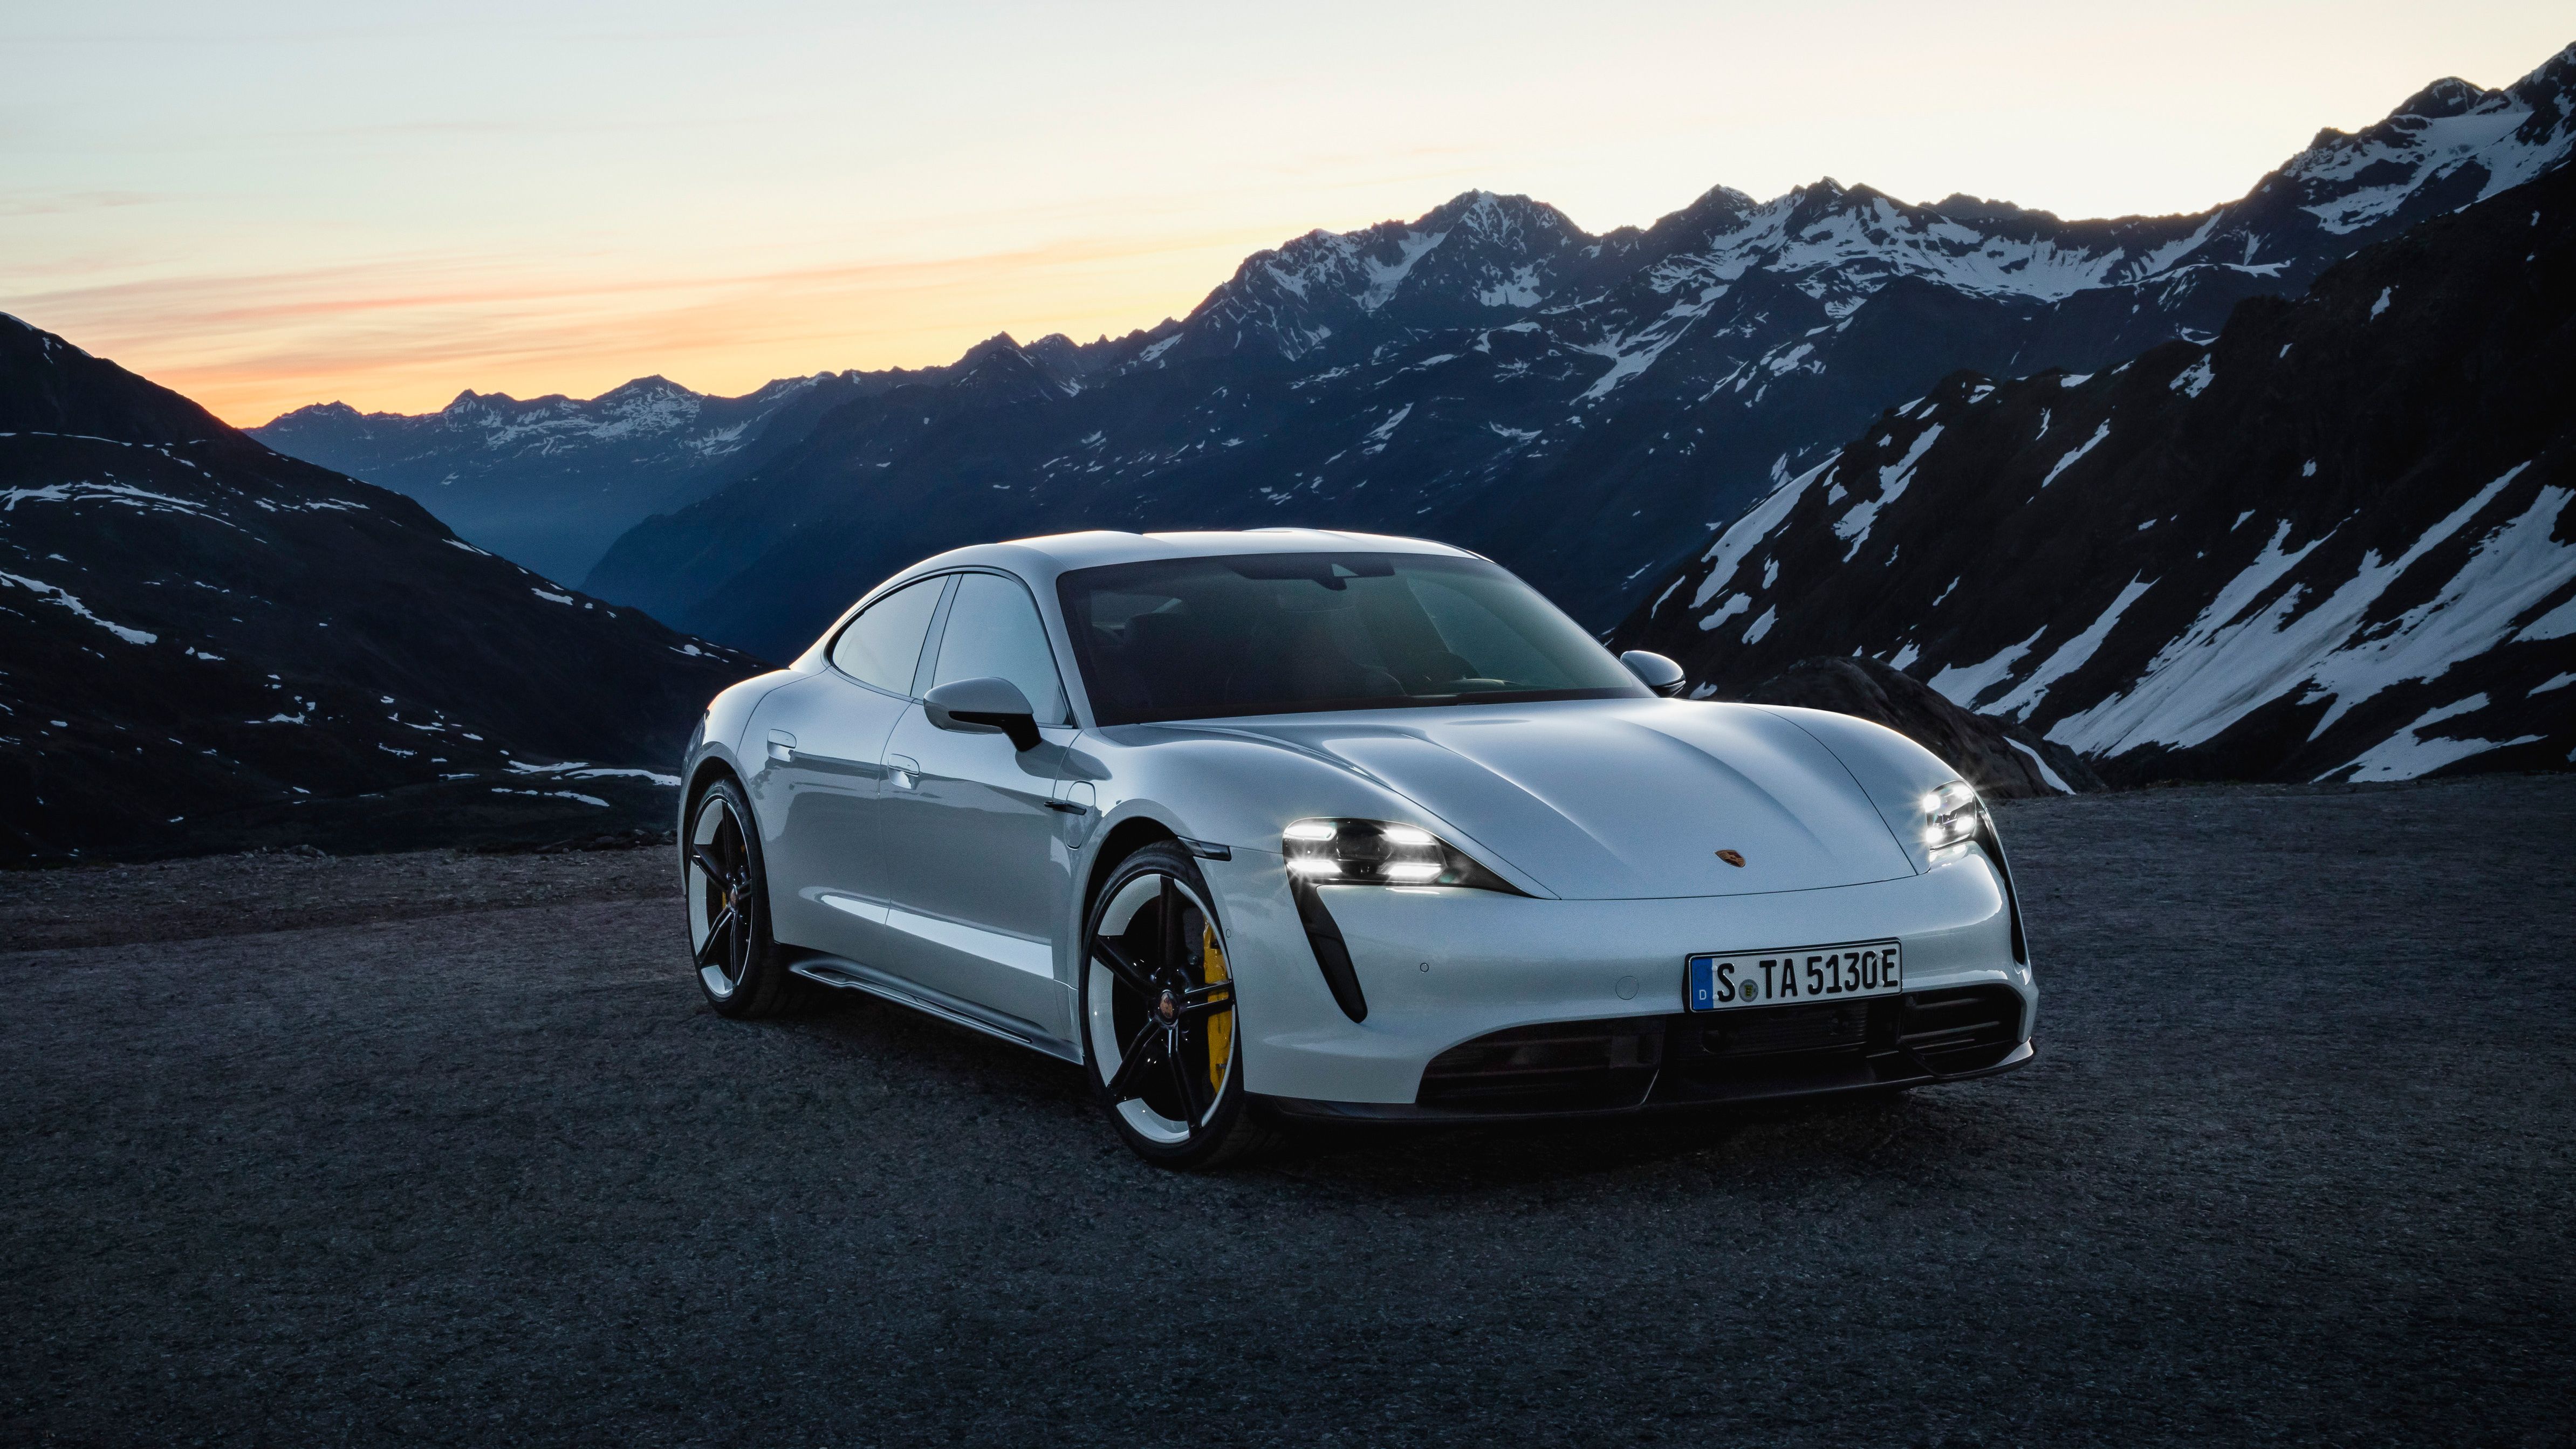 Porsche Taycan Front Quarter View With Mountain Backdrop